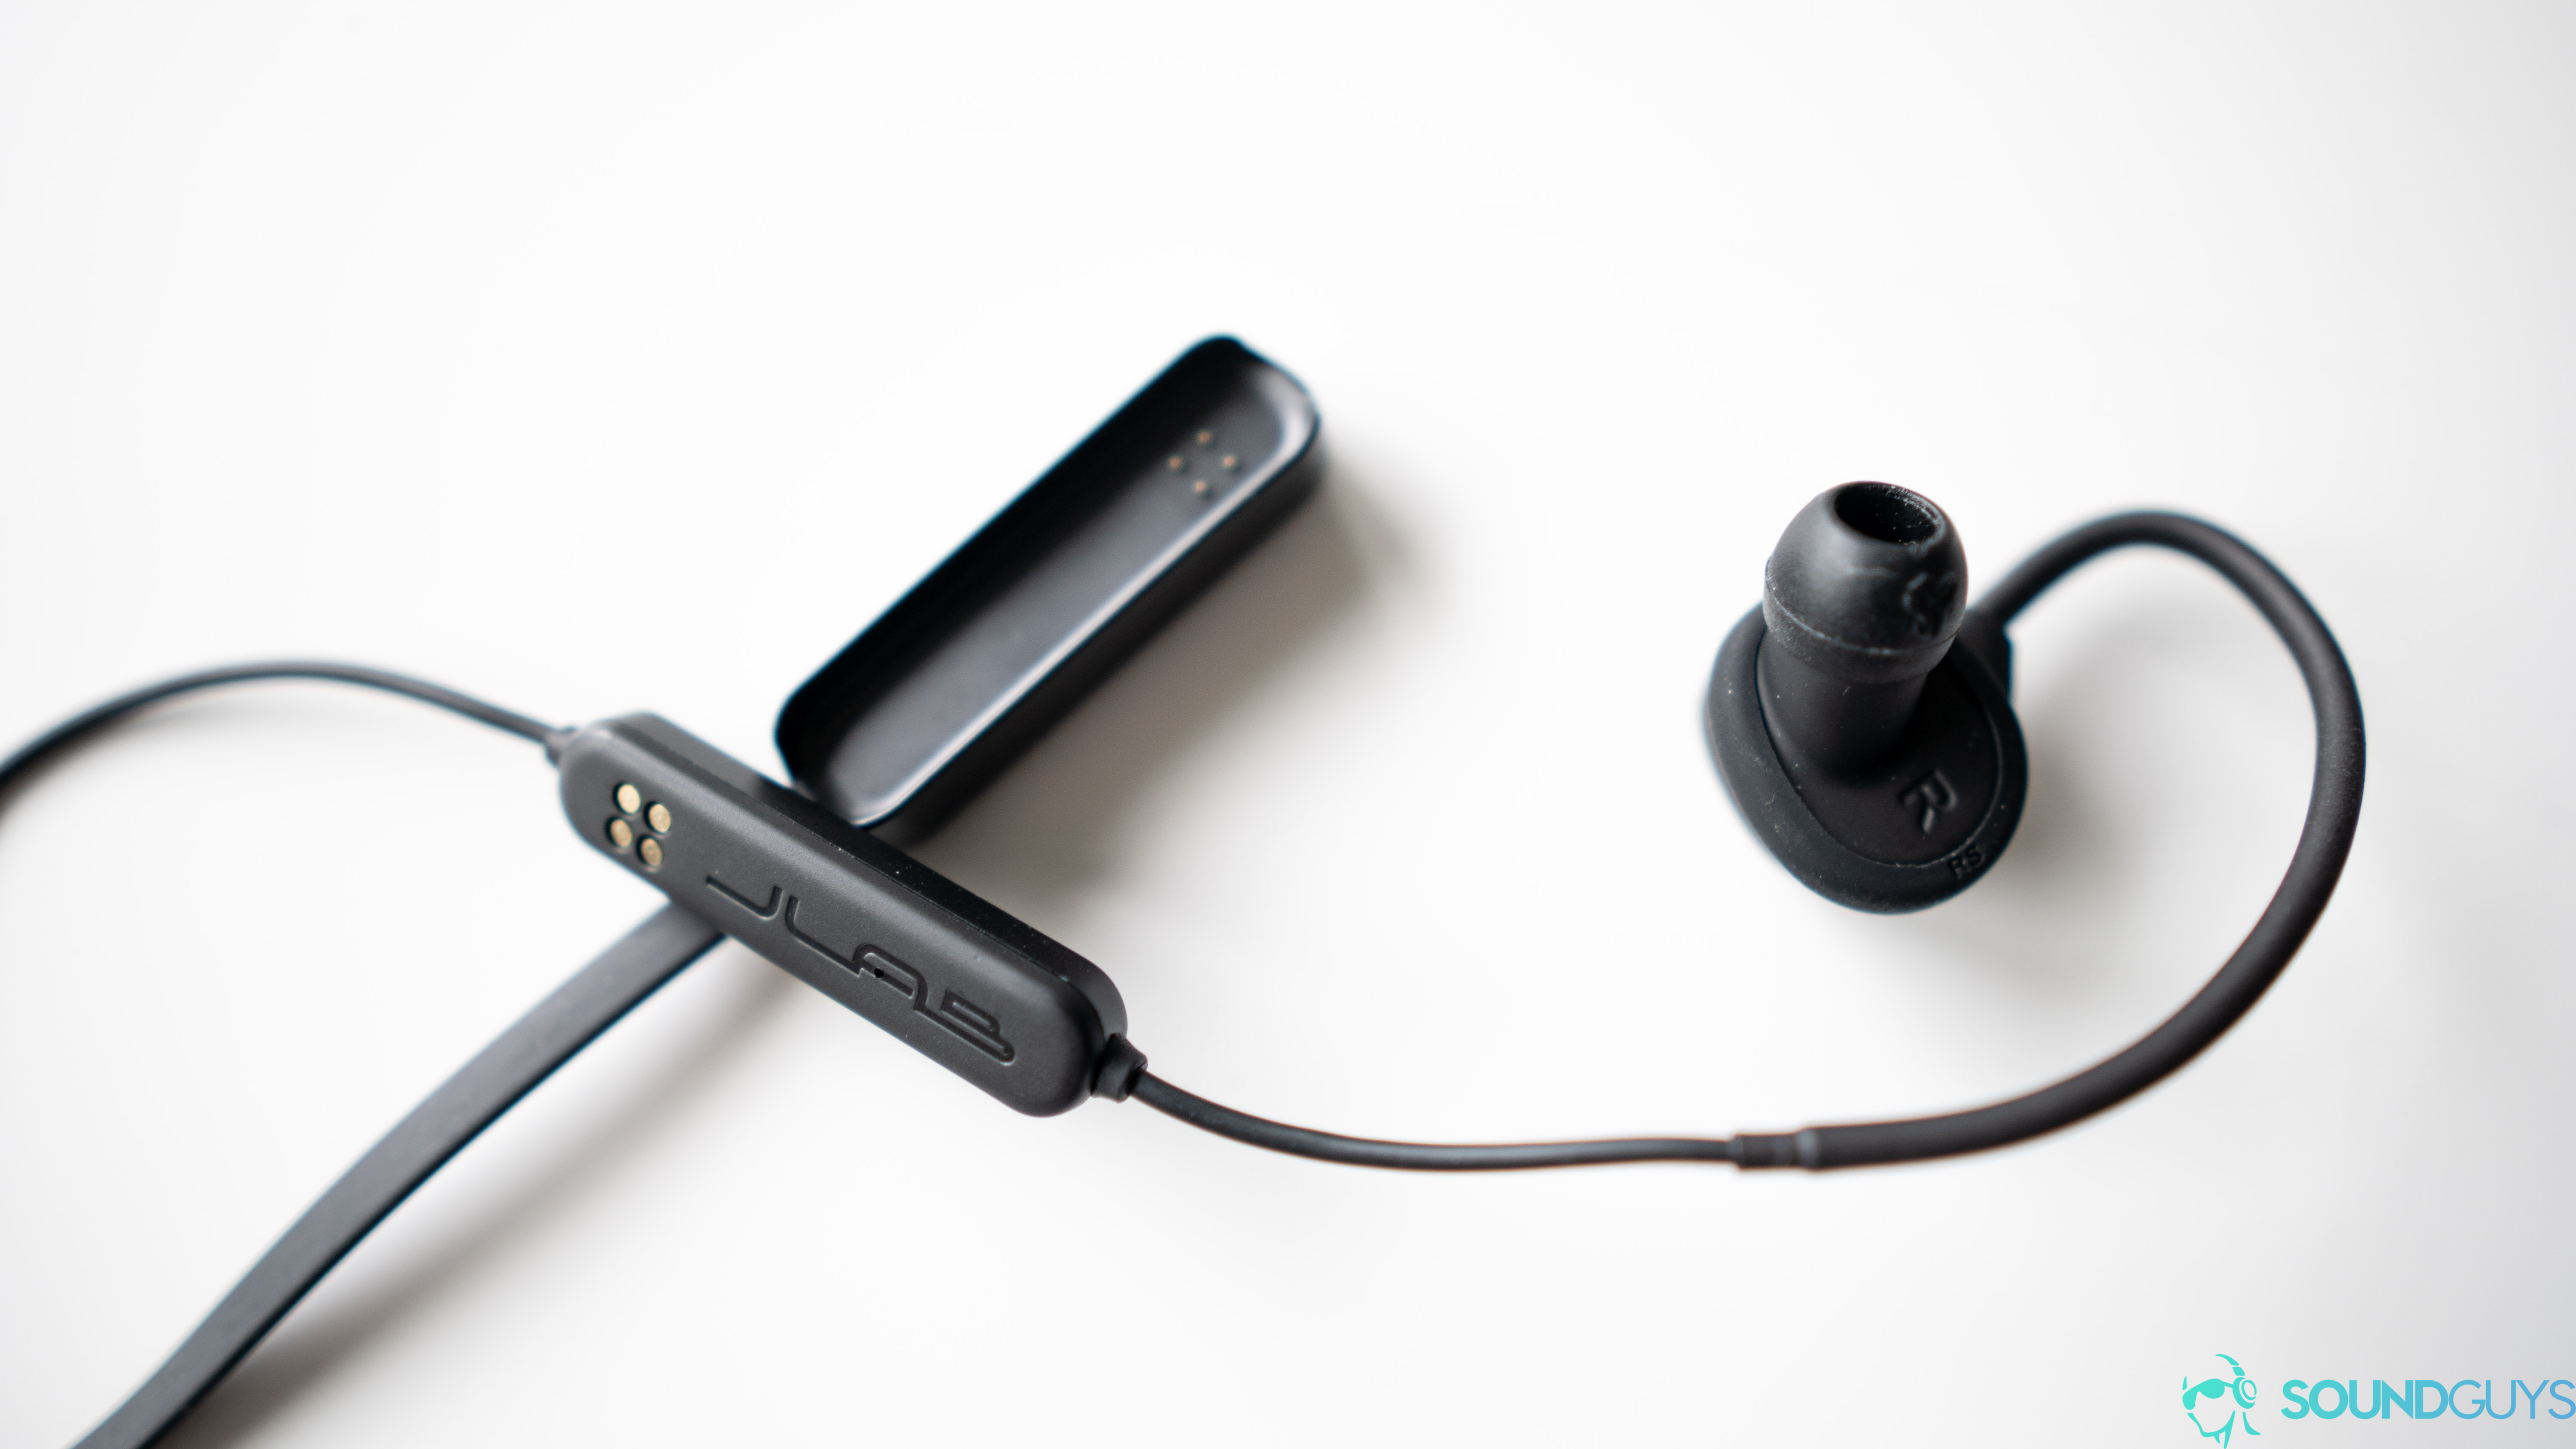 The JLab Epic Sport Wireless 'buds use a proprietary charging cradle